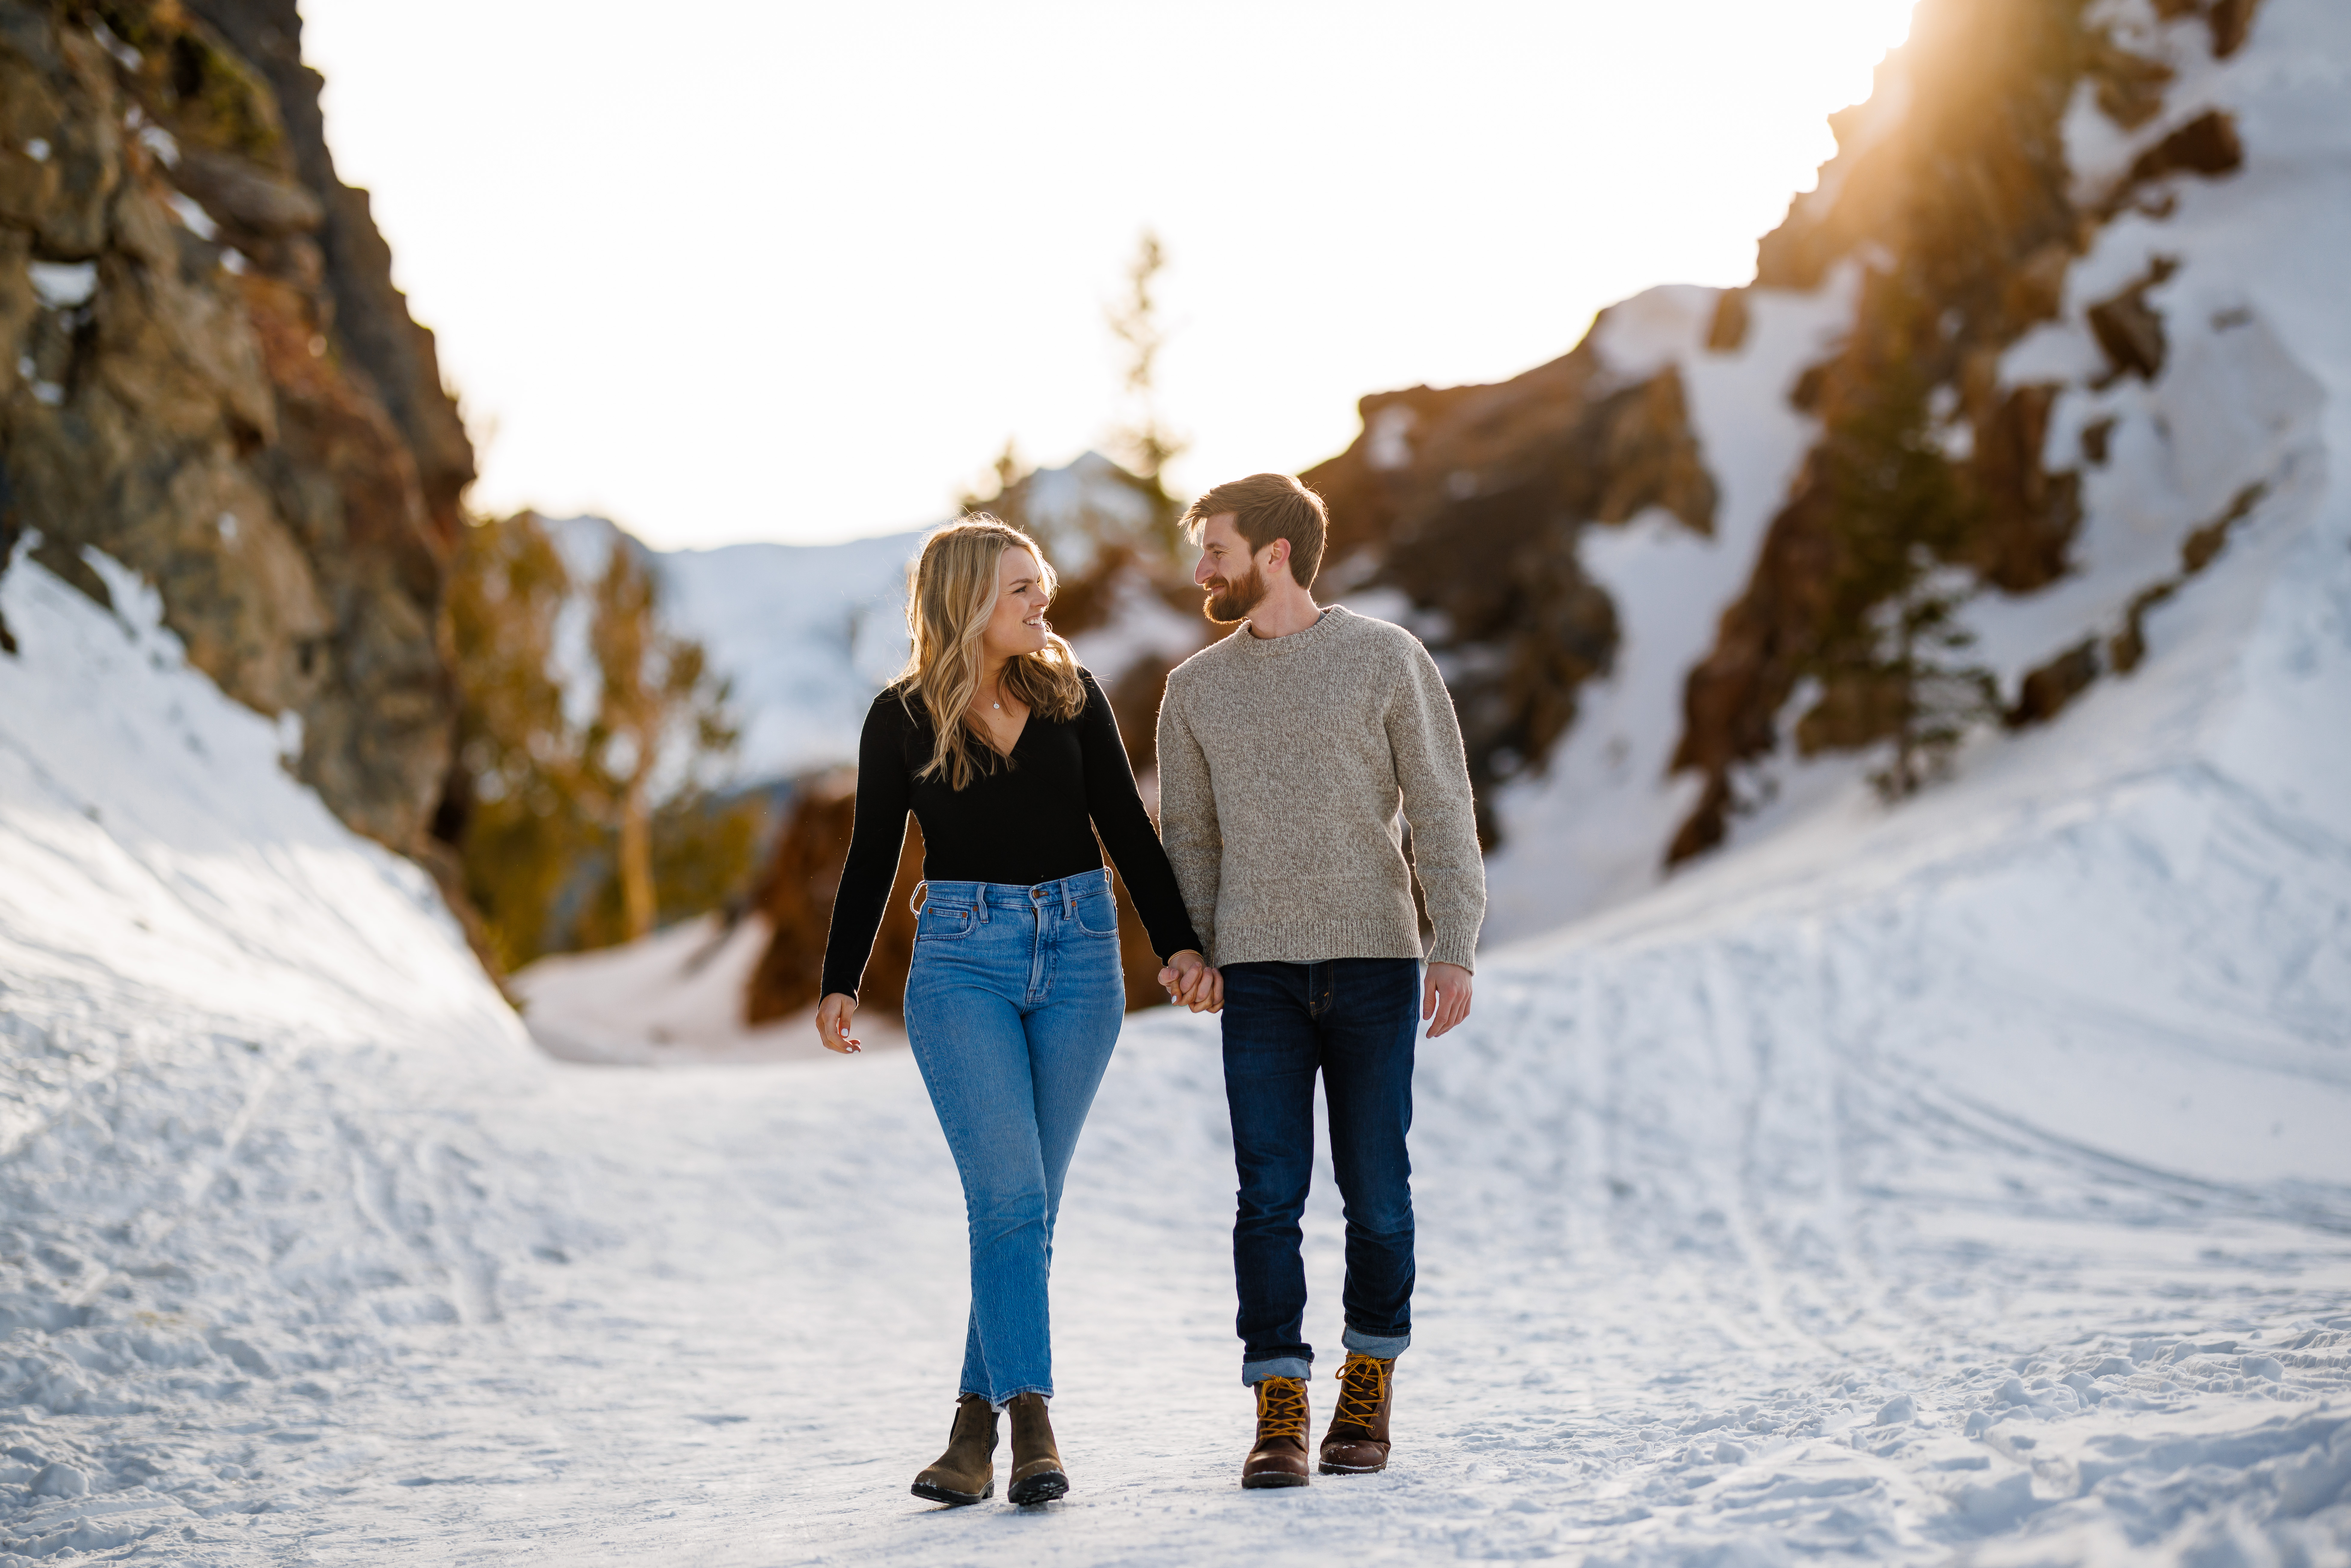 Walking on top of several feet of snow for their Breckenridge Engagement session on Boreas Pass.